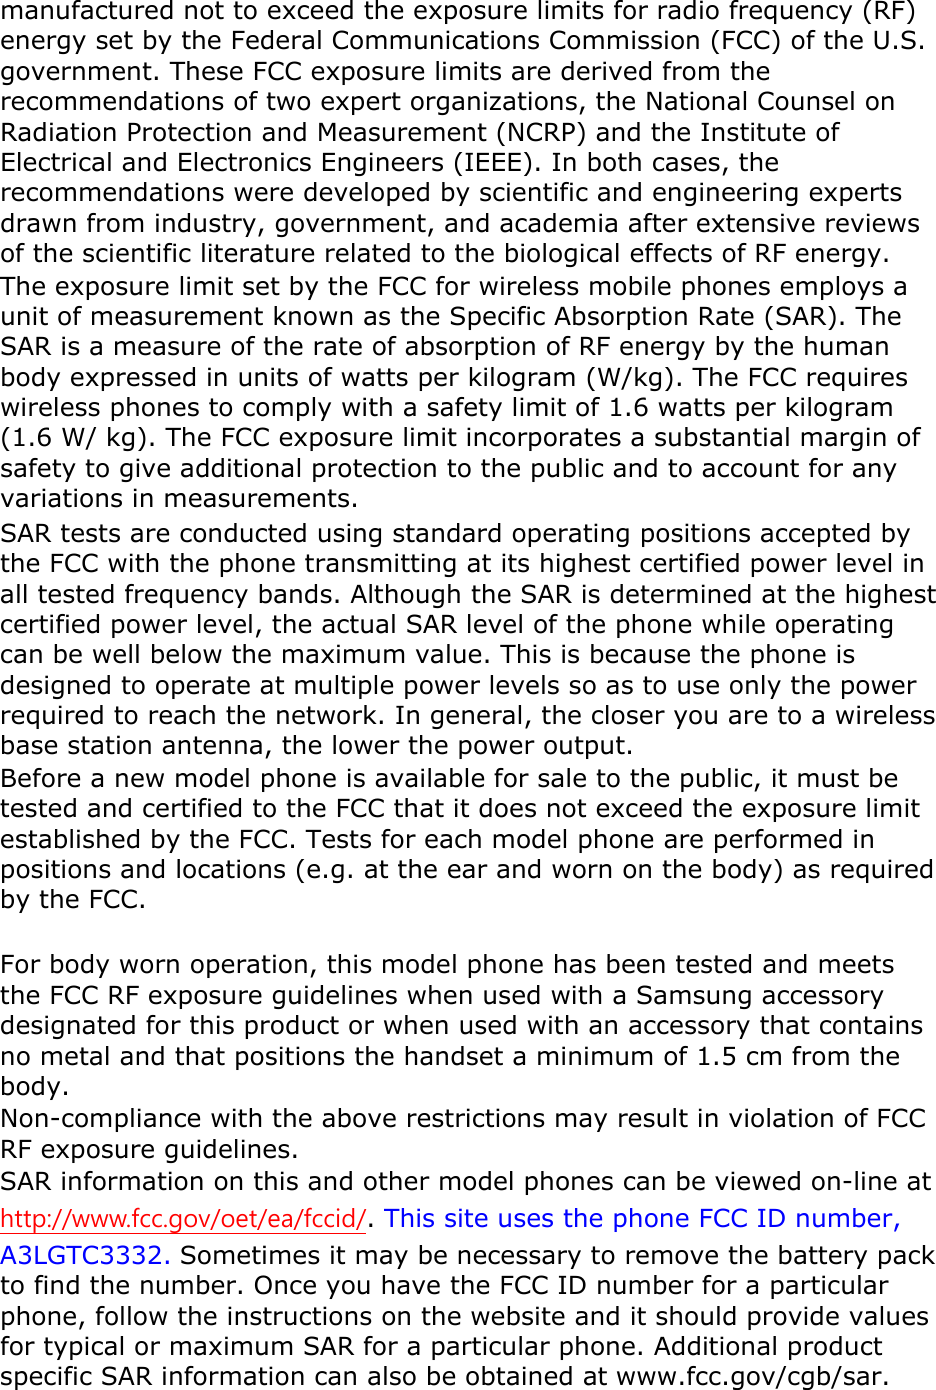 manufactured not to exceed the exposure limits for radio frequency (RF) energy set by the Federal Communications Commission (FCC) of the U.S. government. These FCC exposure limits are derived from the recommendations of two expert organizations, the National Counsel on Radiation Protection and Measurement (NCRP) and the Institute of Electrical and Electronics Engineers (IEEE). In both cases, the recommendations were developed by scientific and engineering experts drawn from industry, government, and academia after extensive reviews of the scientific literature related to the biological effects of RF energy.The exposure limit set by the FCC for wireless mobile phones employs a unit of measurement known as the Specific Absorption Rate (SAR). The SAR is a measure of the rate of absorption of RF energy by the human body expressed in units of watts per kilogram (W/kg). The FCC requires wireless phones to comply with a safety limit of 1.6 watts per kilogram (1.6 W/ kg). The FCC exposure limit incorporates a substantial margin of safety to give additional protection to the public and to account for any variations in measurements.SAR tests are conducted using standard operating positions accepted by the FCC with the phone transmitting at its highest certified power level in all tested frequency bands. Although the SAR is determined at the highest certified power level, the actual SAR level of the phone while operating can be well below the maximum value. This is because the phone is designed to operate at multiple power levels so as to use only the power required to reach the network. In general, the closer you are to a wireless base station antenna, the lower the power output. Before a new model phone is available for sale to the public, it must be tested and certified to the FCC that it does not exceed the exposure limit established by the FCC. Tests for each model phone are performed in positions and locations (e.g. at the ear and worn on the body) as required by the FCC.      For body worn operation, this model phone has been tested and meets the FCC RF exposure guidelines when used with a Samsung accessory designated for this product or when used with an accessory that contains no metal and that positions the handset a minimum of 1.5 cm from the body.  Non-compliance with the above restrictions may result in violation of FCC RF exposure guidelines. SAR information on this and other model phones can be viewed on-line at http://www.fcc.gov/oet/ea/fccid/. This site uses the phone FCC ID number, A3LGTC3332. Sometimes it may be necessary to remove the battery pack to find the number. Once you have the FCC ID number for a particular phone, follow the instructions on the website and it should provide values for typical or maximum SAR for a particular phone. Additional product specific SAR information can also be obtained at www.fcc.gov/cgb/sar. 